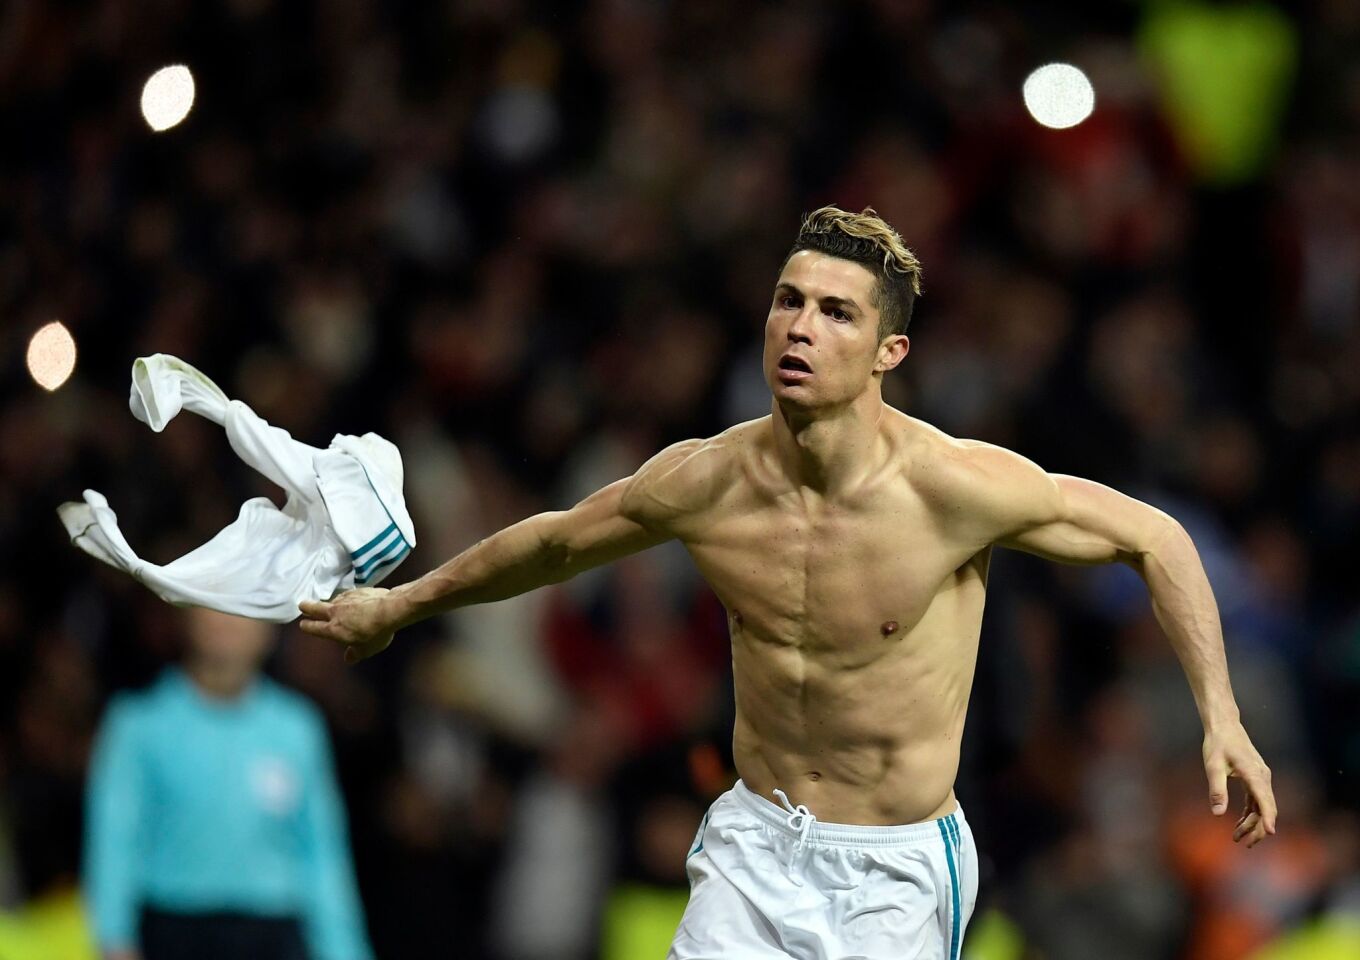 Real Madrid's Portuguese forward Cristiano Ronaldo celebrates after scoring during the UEFA Champions League quarter-final second leg football match between Real Madrid CF and Juventus FC at the Santiago Bernabeu stadium in Madrid on April 11, 2018. / AFP PHOTO / OSCAR DEL POZOOSCAR DEL POZO/AFP/Getty Images ** OUTS - ELSENT, FPG, CM - OUTS * NM, PH, VA if sourced by CT, LA or MoD **